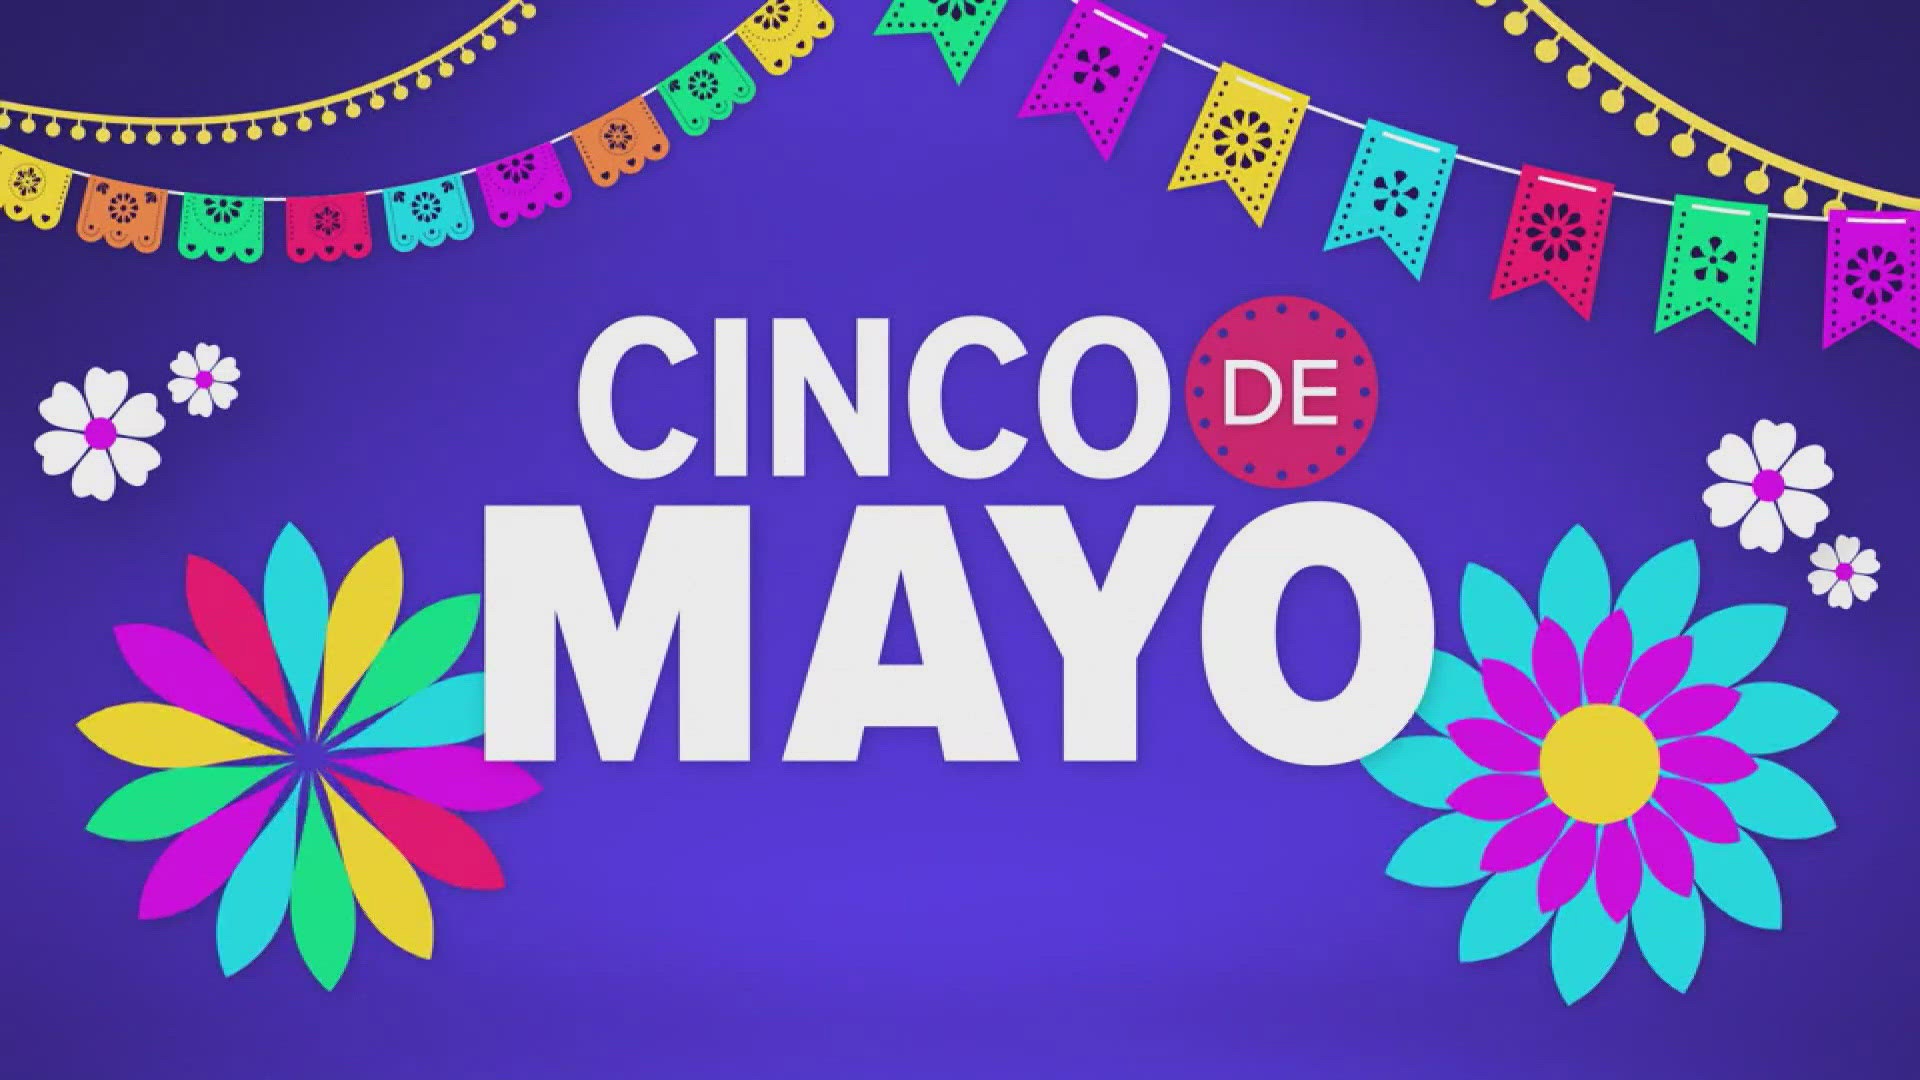 A look at some of the Cinco de Mayo celebrations going on around Puget Sound